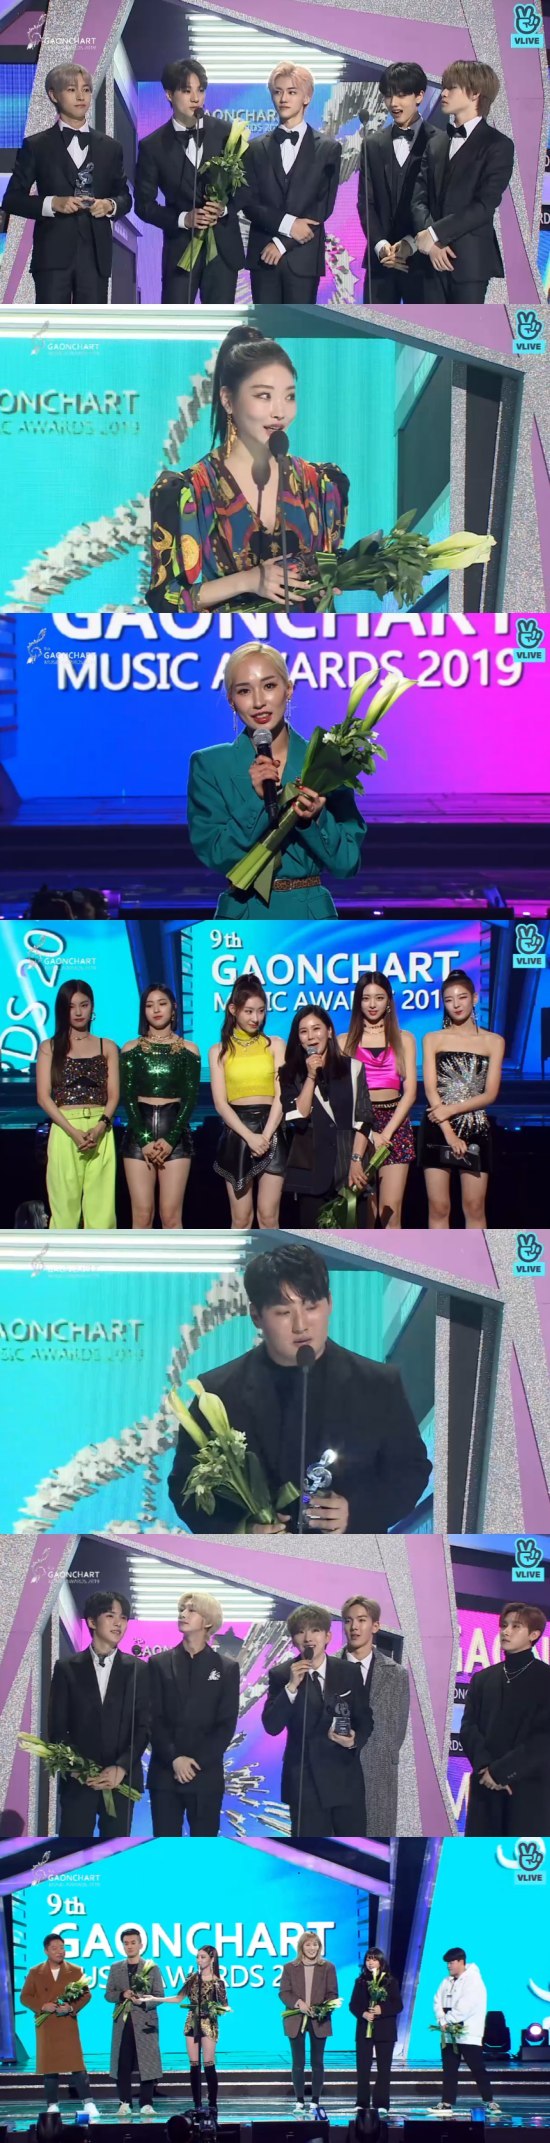 BTS won three gold medals at the 9th Gaon Chart Music Awards.The 9th Gaon Chart Music Awards were held at Jamsil Indoor Gymnasium in Songpa-gu, Seoul on the 8th, and the group Super Junior Lee Teuk and ITZY Lia took charge of the proceedings.Ben and MC The Max won the award in December 2018 and January 2018 for the Singer of the Year.Ben said, I am so happy to be loved so much while doing what I really like, and I feel heavy on how to pay it back.I will repay everyone who has been here with a good song. I will always sing with gratitude. The Dumb is a song about the foolish love story of the early 20s. It seems that it was painful until this song was born.It seems that such feelings are well contained, and it has been a great year for many people to love. Thank you so much and thank you to Mamamu members and their families. Taeyeon won the March category and said, I am so grateful for your love of Four Seasons. I am grateful to all SM employees who always compromise and lead me, and I am grateful to my beloved fans.I will repay you with great Music, he said.I am the only one who won the April category in spring, said a red adolescent. Many artists seem to be very worried and trying to make an album.I hope that in 2020, an environment in which all artists, including us, can be fairly respected will be created.I hope that their voices and stories will be a year when light can shine. Davichi won the May category for My Last Word I Didnt Give You; they said in the video, Ill repay you with better Music, Im so grateful.Yoon Min-soo, who won the singer of the year in June for drinking is a problem, said, Yoon Min-soo, who is receiving many misunderstandings and speculations, can not live with his mind.I would like to tell all the seniors and viewers here.Vibe did not do anything shameful, and all the artists in the company are misunderstood and misunderstood, and I want to do the Music as I was proud.I hope that this controversy will correct the wrong things and do not harm those who are honest with Music. Ben, who won the second prize in the July category for Thank You for Breaking Up, shed tears, saying, I will not forget my gratitude.Stern won the August category with Flying and the Bad Musician won the September category of the years singer with How can I love you until parting, I love you.MC Mong became the winner of the October category with popular.He said in the video, It is not a prize I receive well, but it seems to be a homework that you have given me to cheer with the fans who listened to my bad Music.I was able to stand here again with warm encouragement and support. I will always make Music that can be comfort and joy. IU won the November category for Love Poem. He said, I felt burdened because it was an album for a long time, but I am grateful that so many people love me and listen for a long time.It is an album that I wanted to give comfort to the listeners, but it is an album that remains with beautiful memories that have been comforted. 2019 was a really valuable year, and thanks to your fans, I was able to receive an award that I would like to hear good Music in the future, said one of the new awards.I think I have been loved by my debut in March, and I am grateful to the generous support of my family members.Ill visit you with more wonderful Music, he said.This years World Rookie of the Year award went to Stray Kids and (girls) kids, who said: Thank you to the JYP family and family, I think you get a lot of power thanks to your fans.There were a lot of things in 2019 and I had good things and hard work like I was on a roller coaster, and I am grateful that the fans are around. Thank you for the good award this year, and I appreciate and love the fans who believe and support me, and I appreciate the company members who helped me win this award, the children said.Seventeen won the first and third quarters of the years singer award, and Seventeen, who failed to attend the World Tour schedule, said in a video, I am so happy. Thank you to Carat.I will be a Seventeen who does not settle for this prize and works hard. BTS won the Singer of the Year Award in the second quarter, the Social Hot Star Award and the Retail Album Award; they said in a video, We have received a lot of love from all over the world.Thank you to everyone who loves our Music. I am grateful and loving you for your great love. I will repay you with more wonderful Music. Exo won the fourth quarter of the years singer award; Exo said in a video that he works hard to make a better album and stage.It took me five years to get to the Gaon chart, and I thank my family and fans for my work, and I will try to be a better band in the future, said Enflying, who won the band category this year.Casey won the ballad category: Ive been busking all over the country, Im so grateful and happy to have a big prize on such a big stage, Ill work hard, he said.NCT Dream, which won this years Hot Performance Award, said: Thank you for the big prize, thank your family and thank you for the most important of all, Sizney.The reason why NCT Dreams can exist is because of Sizeney, because her health is the most important thing, she should not eat well, sleep well and catch a cold.The dream is all about the city, he said.I do not think performance can be done alone. I am so grateful to the dancers who are on stage.I hope that someday, a world that looks only at dancers and artists without the word white will come up. This years stylistic career graphs went to Choi Hee-sun, who is in charge of styling the stylists of Choi, Lee, Shim Hee-jung, Shin Ji-won and Lee Si-won.Lim Jae-hyun won the Populer Singer Award for If Love had Practice; he said: Thank you so much for the award.I think it is not a prize I receive, but a prize for those who listen to and sing a lot of my songs. I will show you how hard I try and grow for them. Im so sorry I couldnt be together today, but Ill see you in a better way next time, said Exo, who returned to Exo this years Top Kitseller Award.Paul Kim won the Long Run Music Award for Meet You. Park Jin-woo, the representative of the neuron Music, said, I feel good to receive an award that I did not want even during my school days.I am grateful for listening to my Music and stories. I am proud that you have looked at the process beautifully. Thank you fans for always cheering. Monster X, who won the World Hallyu Star Award, said, I am so grateful. I do not think I would have received a single award without Monbebe.I feel good because I received a great name award, but I think I can get a modifier called World Hallyu Star.I think it was thanks to the singers and senior singers who were able to receive this award. This years record production was won by MNH Entertainments 12 oclock already. I never thought of this award, I think its worth more than any other award.It is more meaningful to receive it with those who support me from behind and give me more trouble when I always receive the prize. The winner of the 9th Gaon Chart Music Awards.▲ New Artist of the Year (Digital Sound Sources Division) - ITZY ▲ New Artist of the Year (Physical Album Division) - Tomorrow By Together ▲ World Rookie of the Year - Stray Kids, (Girls) Children ▲ Singer of the Year Award (Digital Sound Sources Division) - Ben (December 1880 degrees) - MC The Max (January 2019 Trends Over) - Hwasa (February Dumb) - Taeyeon (March Four Seasons) - Red Puberty (April I Only, Spring) - Davichi (Mays My Last Word I Didnt Give You) - Jang Hye-jin X Yoon Min-soo (Junes Im Problem with Drinking) - Ben (July Thank You for Breaking Up) - Sunmi (August Nalari) - Bad Dong Musician (September  How can I love you until parting, I love you?) - MC Mong (October popular) - IU (November Love poem) ▲ Singer of the Year (Physical Album Division) - Seventeen (Q1 YOU MADE MY DAWN) - BTS (Q2MAP OF THE SOUL: PERSONA) - Seventeen (3Q An Ode) - Exo (4Q08 OBSSESION), Social Hot Star of the Year - BTS, Retail Album of the Year - BTS, Activist of the Year (Chorus) - Ju Chanyang, Overseas Sound Source of the Year - Anne Marie, Overseas Rising Star of the Year - Billy Eilis, Activist of the Year - Choi ▲ Songwriting of the Year - Min Yeon-jae ▲ Discovery of the Year (band) - Enflying ▲ Discovery of the Year (ballad) - Casey ▲ Hot Performance of the Year - NCT Dream, Chungha ▲ Style of the Year (career graphy) - Choi Ri-an, Shim Hee-jung, Shin Ji-won, Lee Si-won ▲ Style of the Year Award (stylelist) - Choi Hee-sun ▲ Publishing Singer of the Year Lim Jae-hyun ▲ Top Kit Seller of the Year - Exo ▲ Long Run Music Award of the Year - Pol Kim ▲ World Hallyu Star Award - Monster X ▲ Record Production Award of the Year - MNH Entertainment (Chungha 12 oclock)Photo: Naver V live broadcast screen